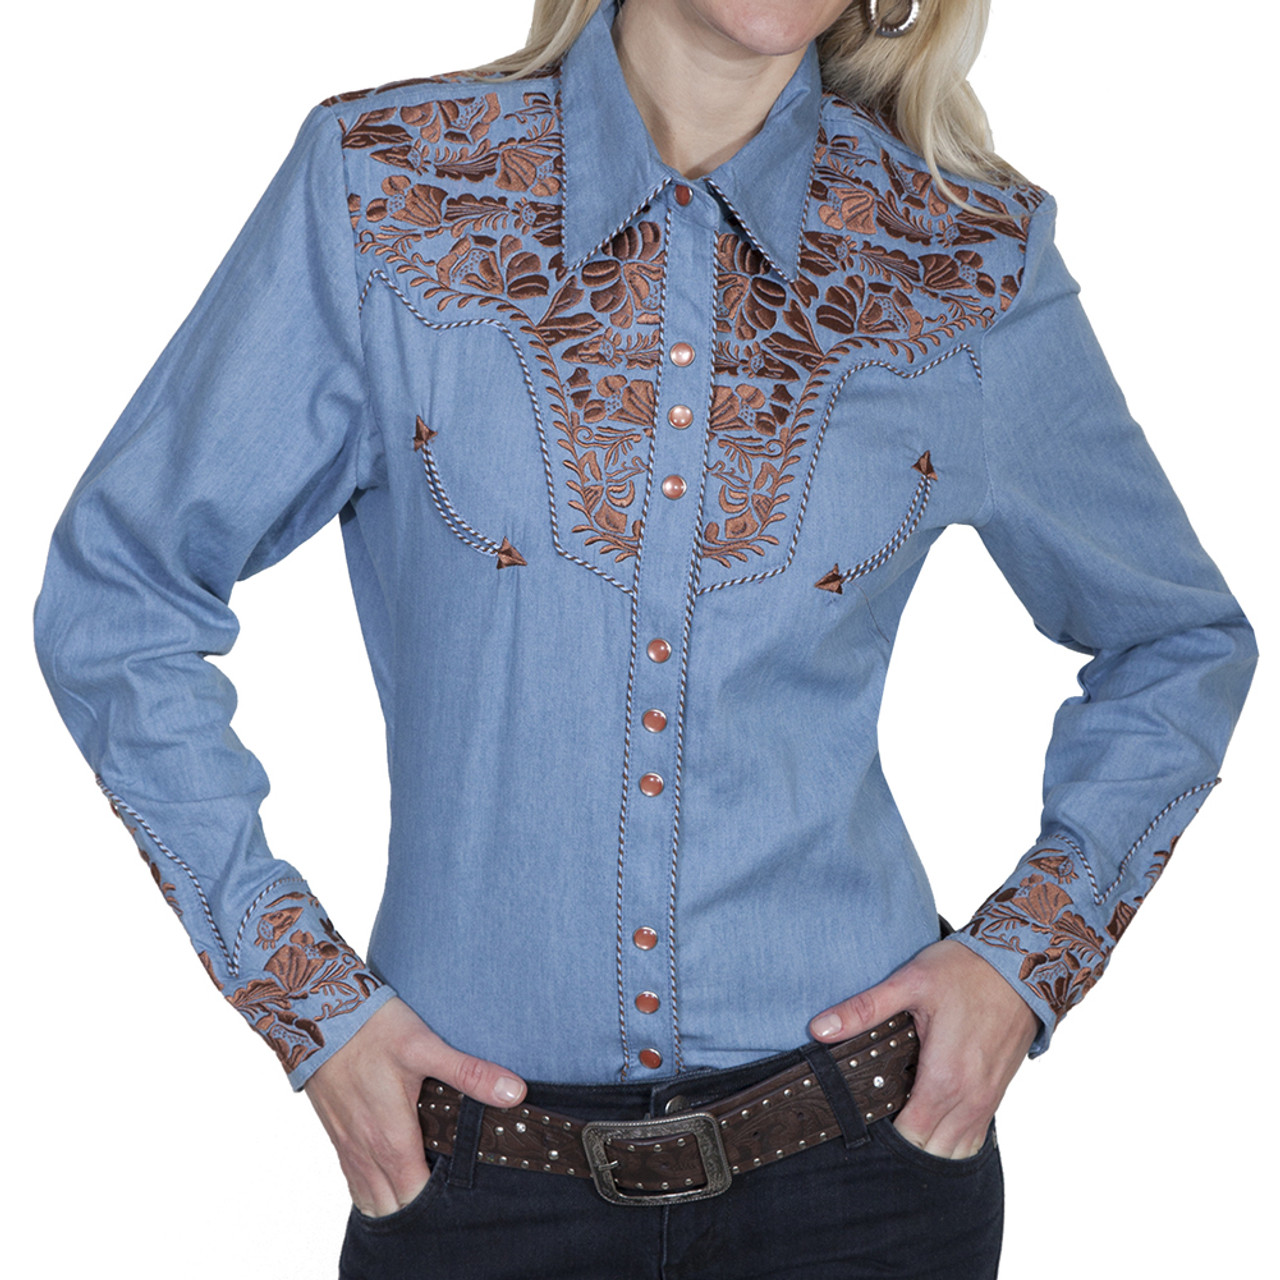 Product Name: Scully Women's Floral Embroidered Long Sleeve Western Shirt